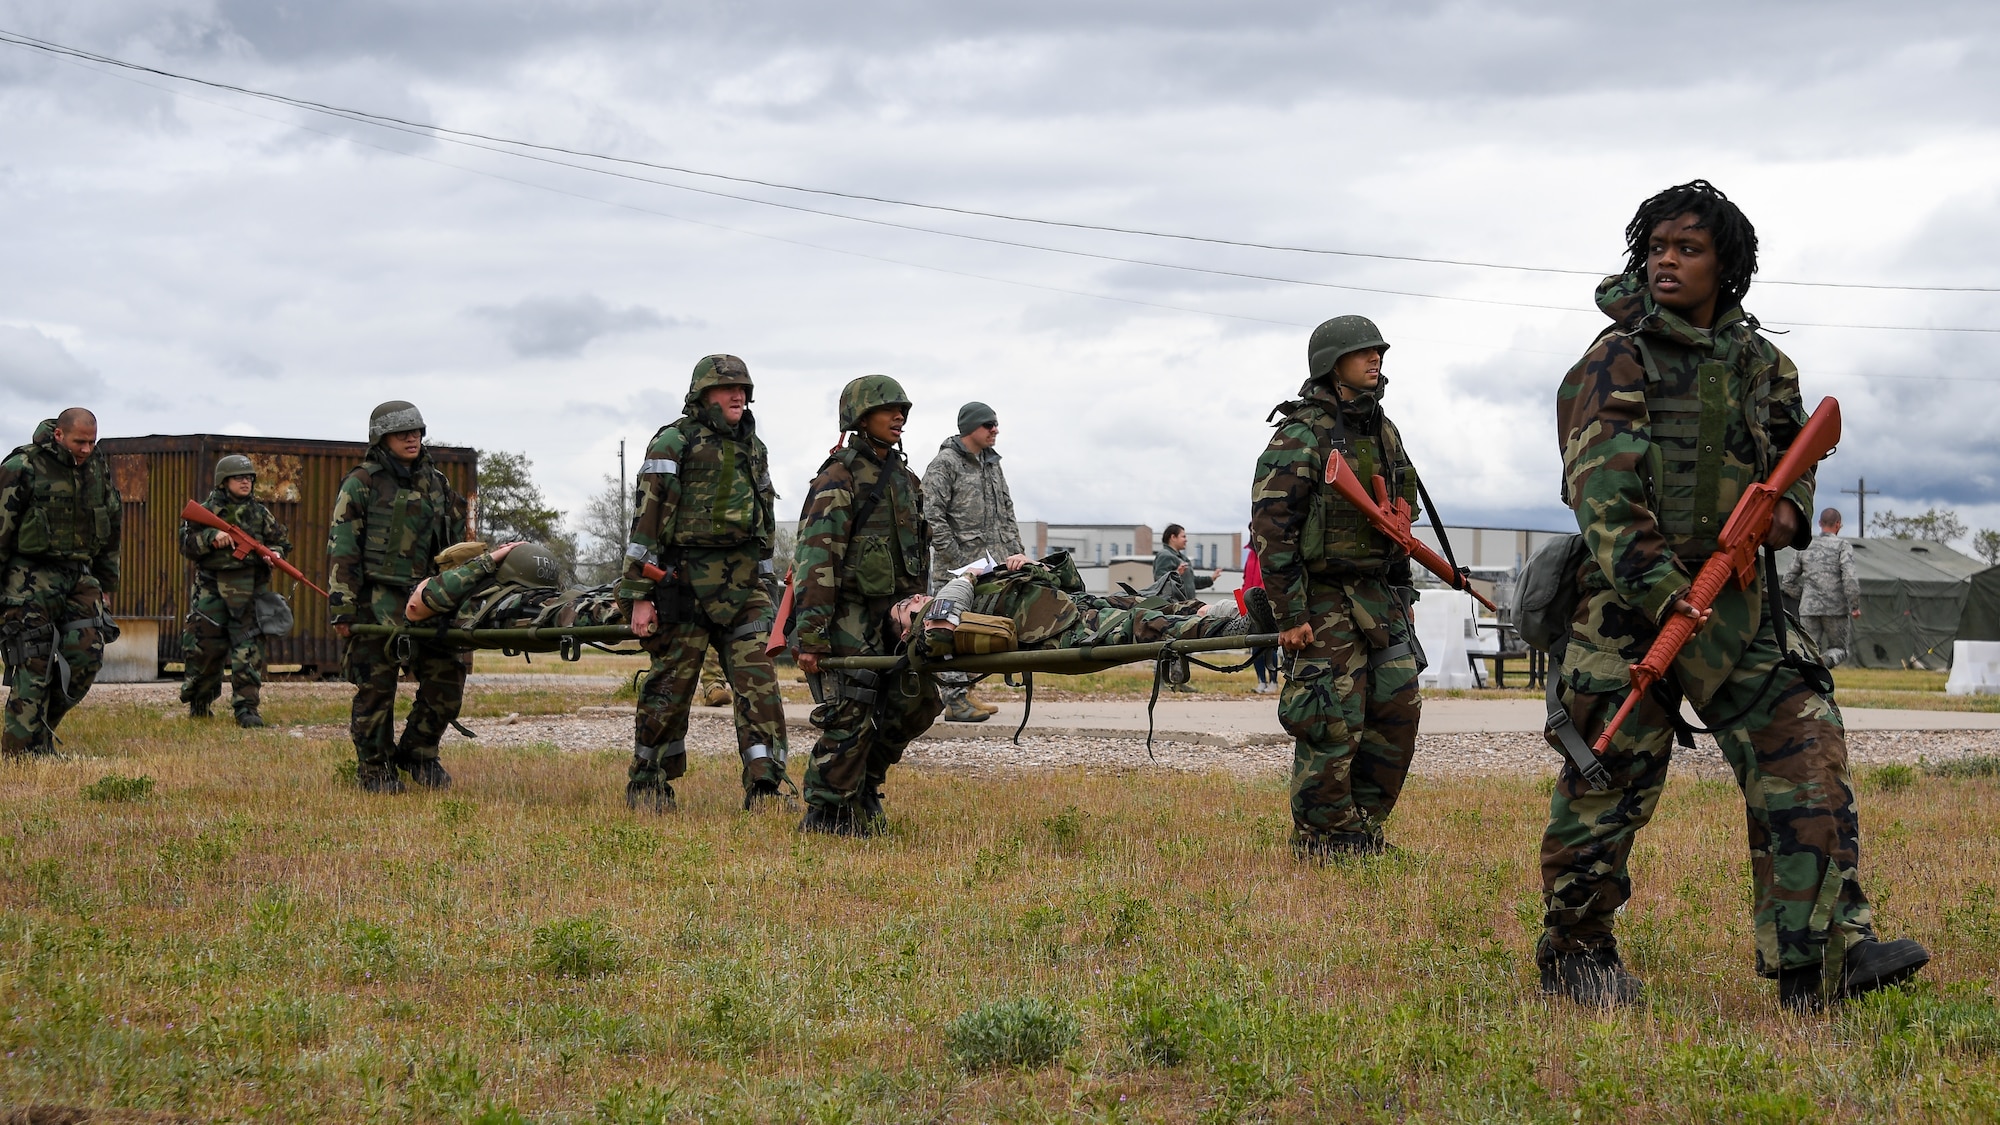 Airmen evacuate simulated casualties during a Contracting Directorate field exercise at Hill Air Force Base, Utah, May 22, 2019. The exercise simulated scenarios specific to the contracting mission in a deployed environment. Contracting specialists purchase supplies and services essential to operational continiuty and mission success. (U.S. Air Force photo by R. Nial Bradshaw)